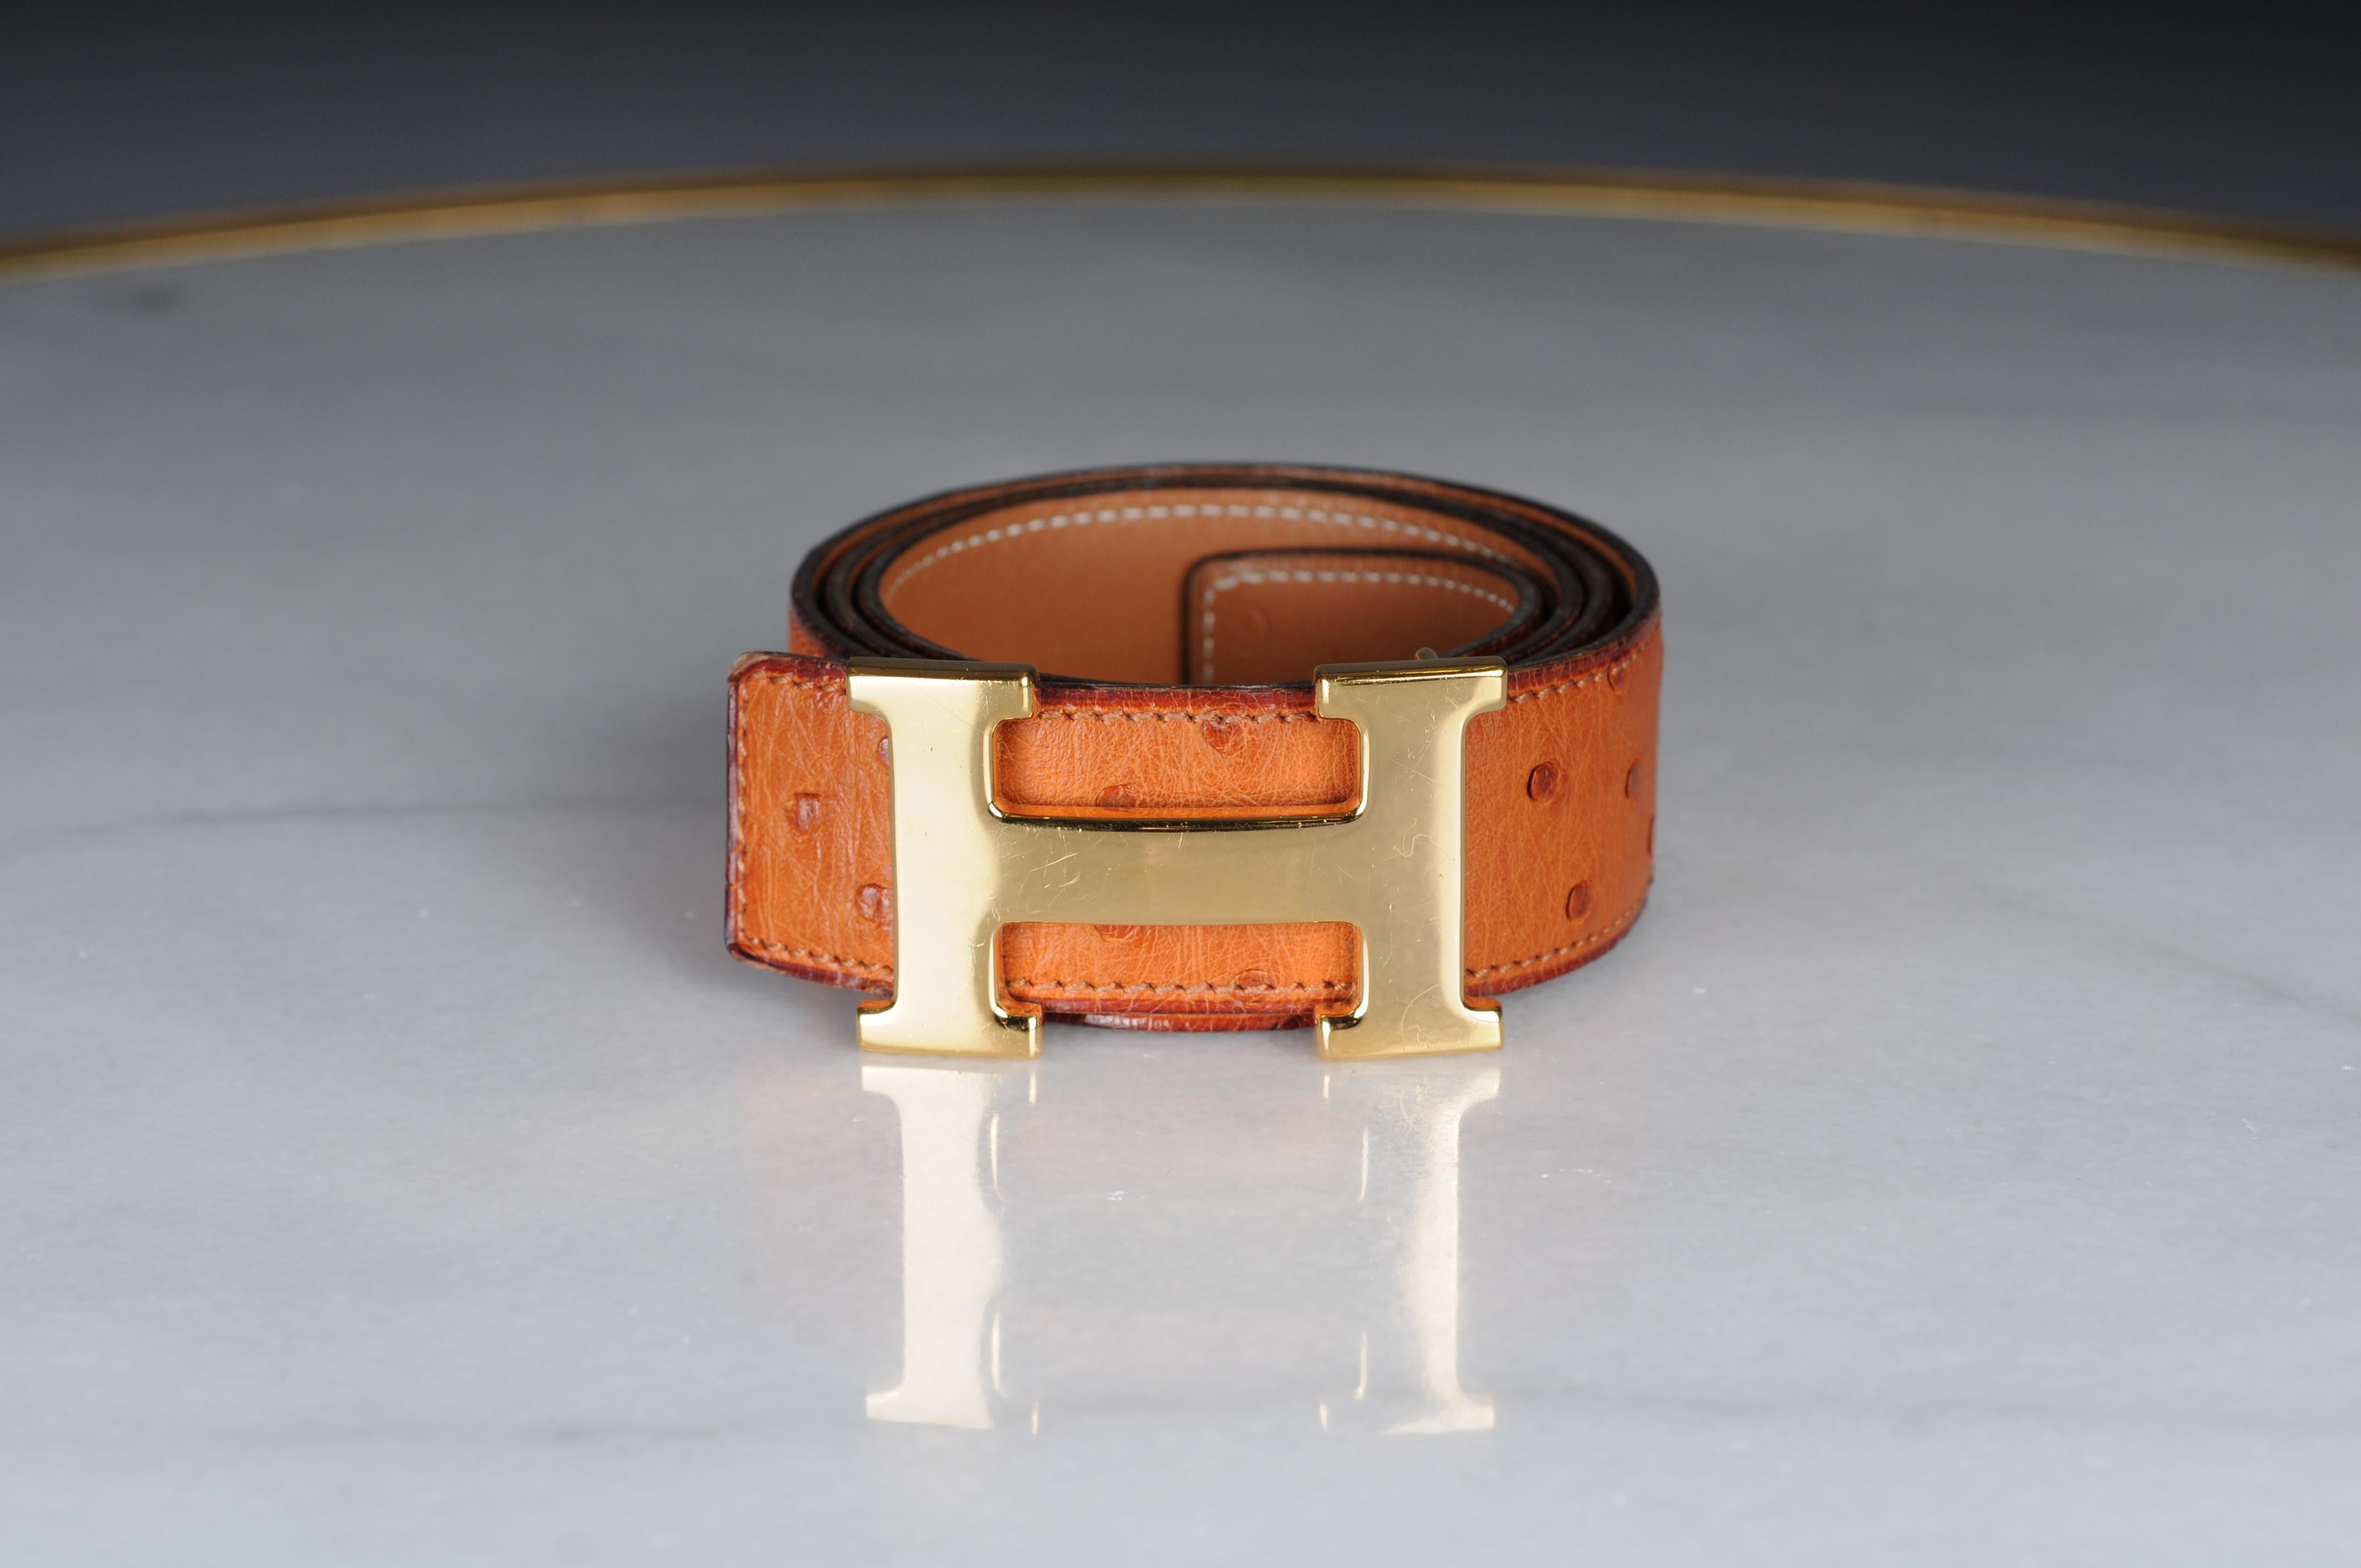 High Quality Ostrich Leather: Carefully selected for its durability and elegant texture.
Compatible Design: Fits the HERMES H Buckle Belt Kit for maximum versatility.
Style and Durability: Combines style and strength to complement various